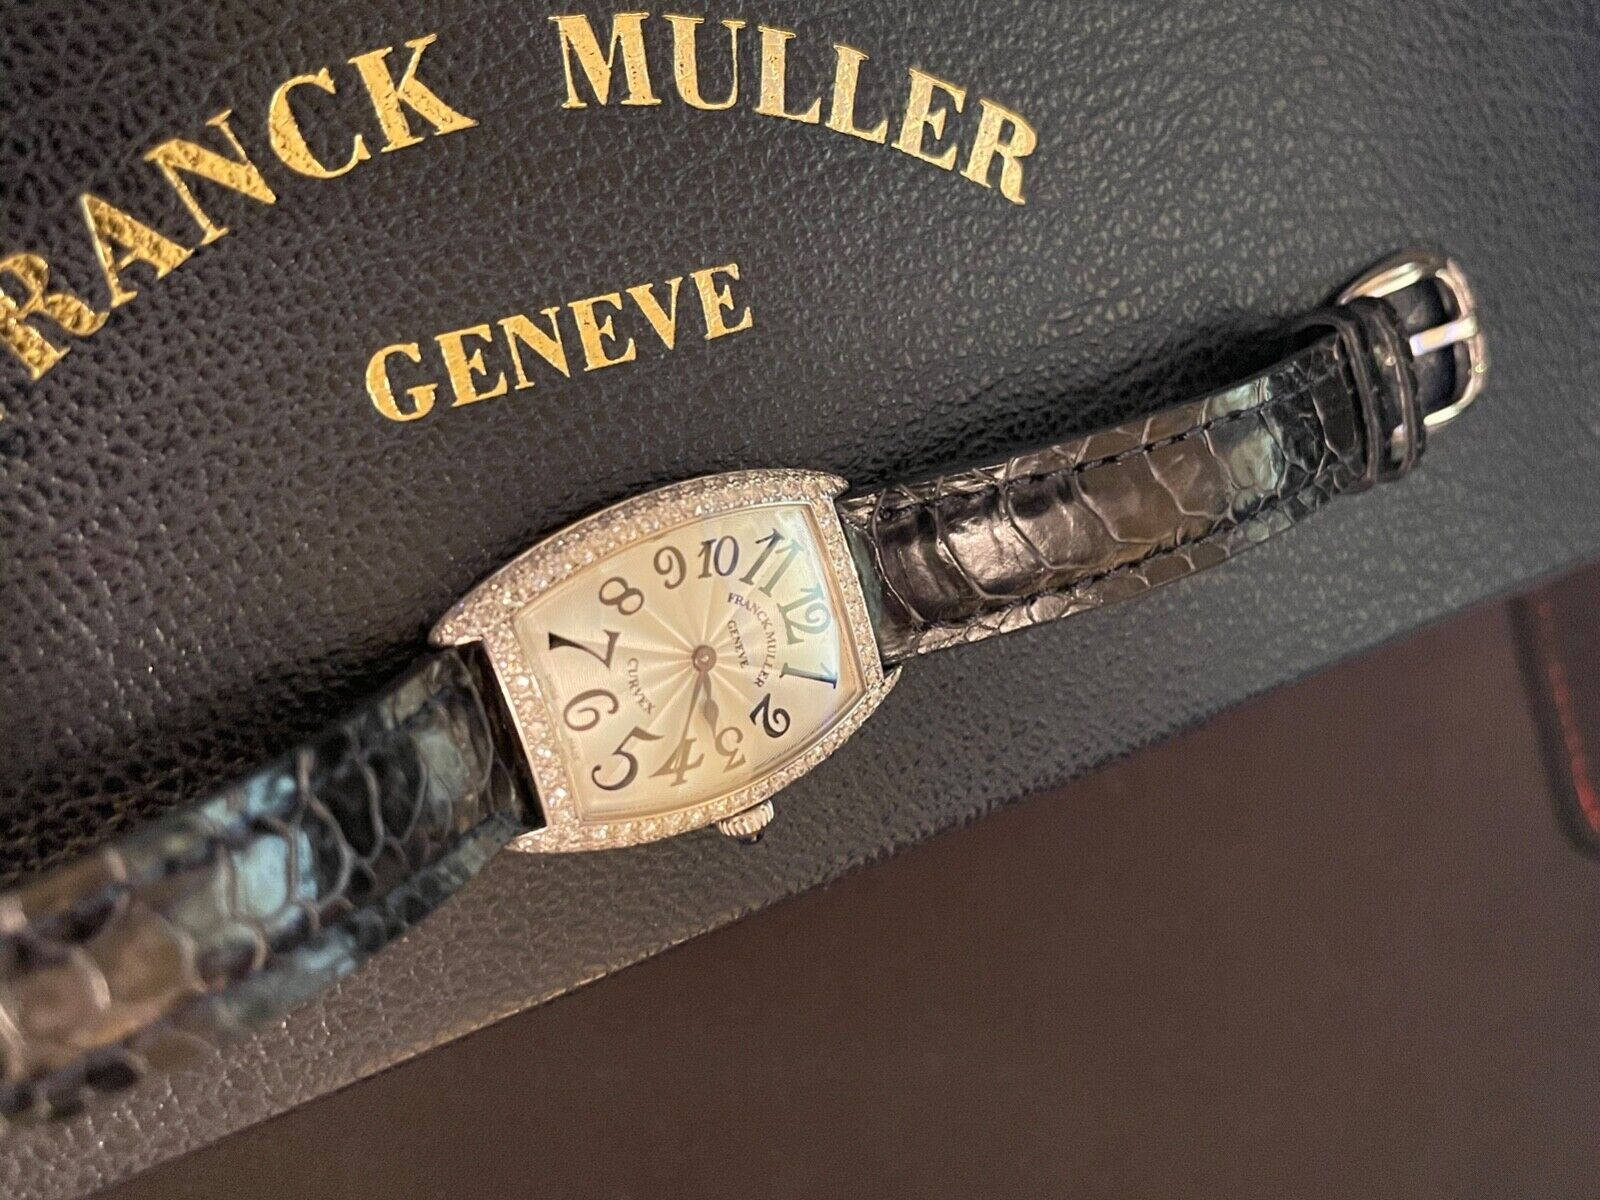 Franckmuller Geneve Is A Well-known Luxury Watch Brand. They Are Popular For Their Exquisite Designs And Exceptional Craftsmanship. Fondo de pantalla